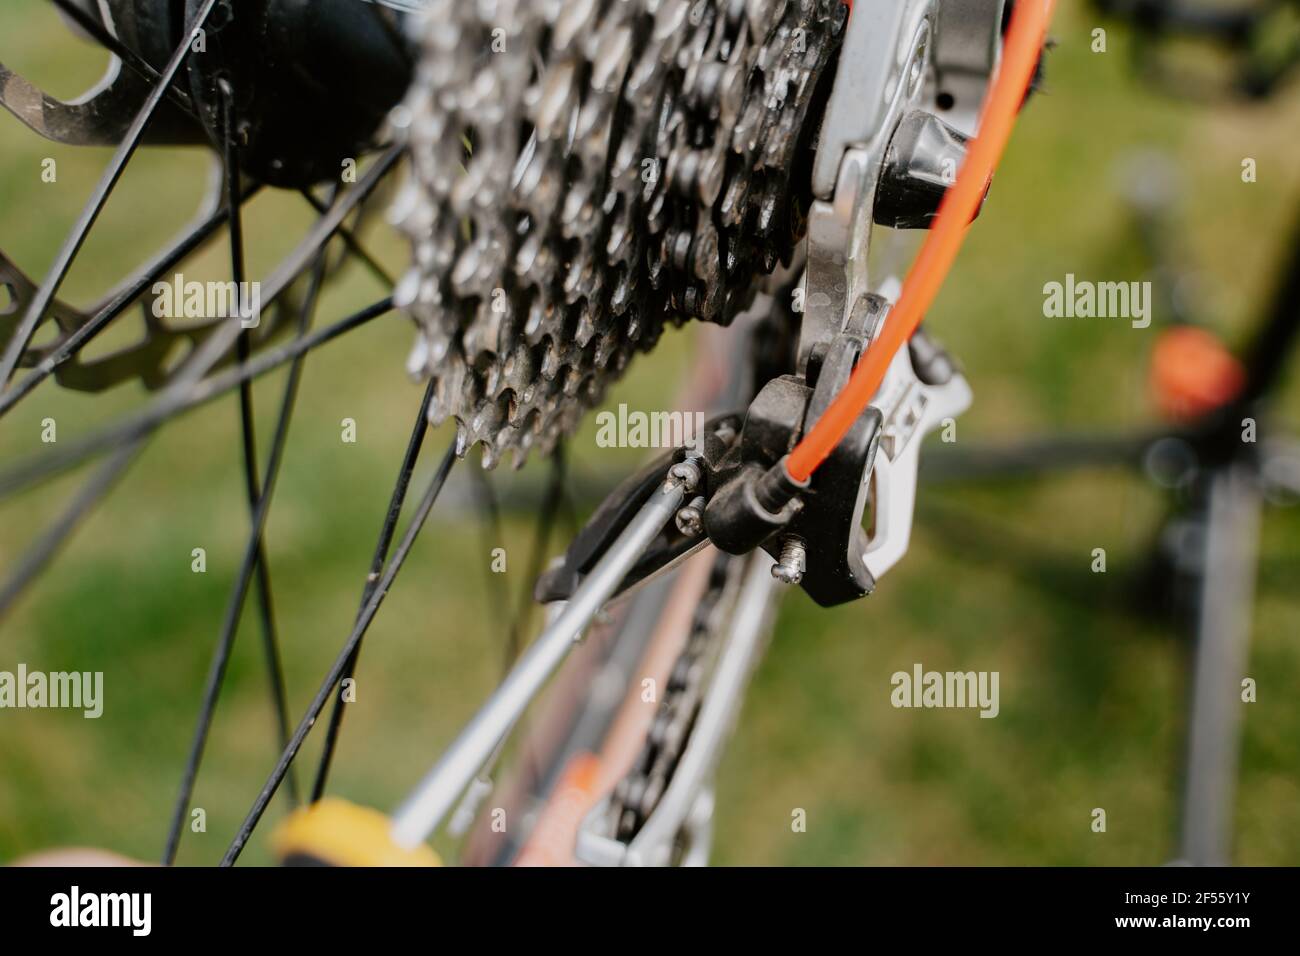 Closeup of bicycle mechanic with a screwdriver repairing bicycle Stock Photo